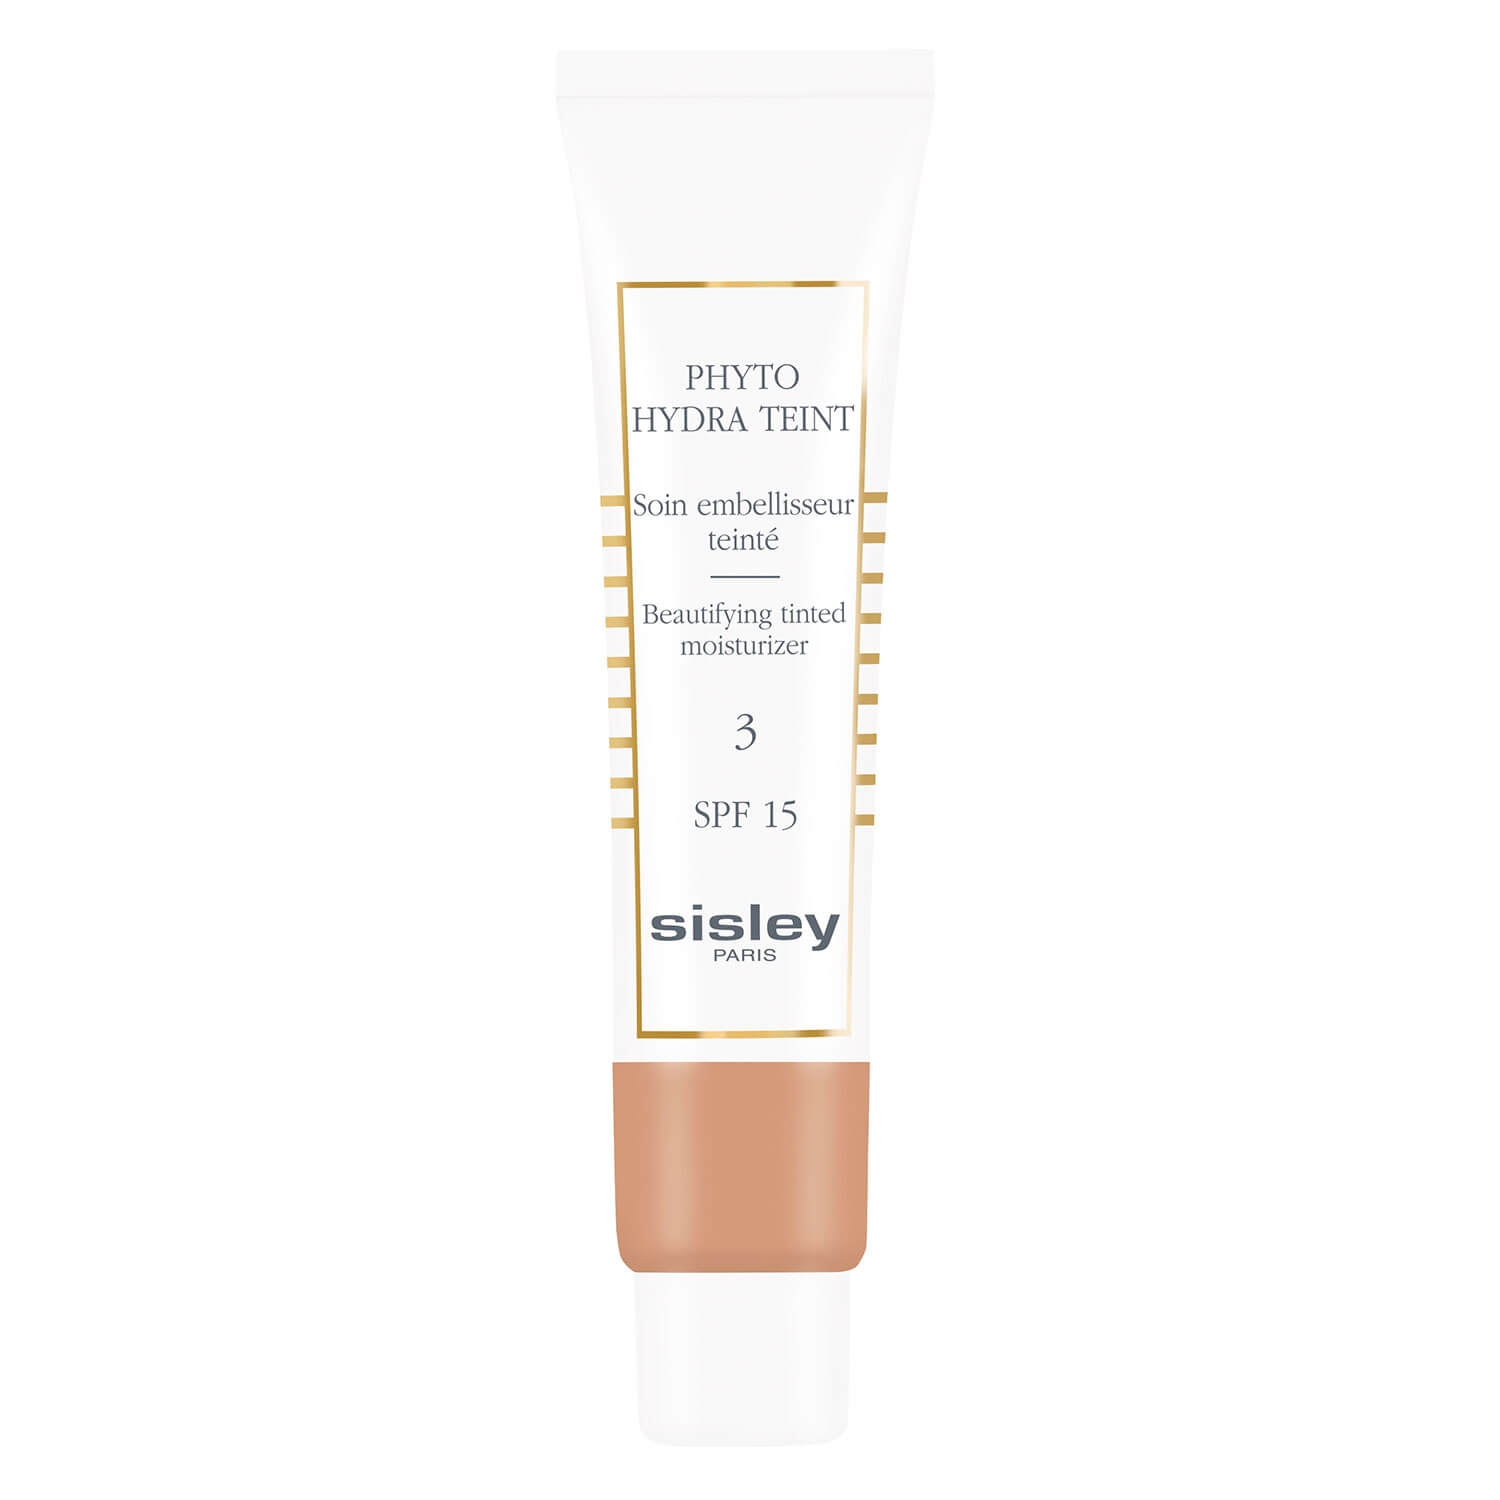 Product image from Phyto Hydra Teint - Soin Embelisseur Teinté Golden 3 SPF 15